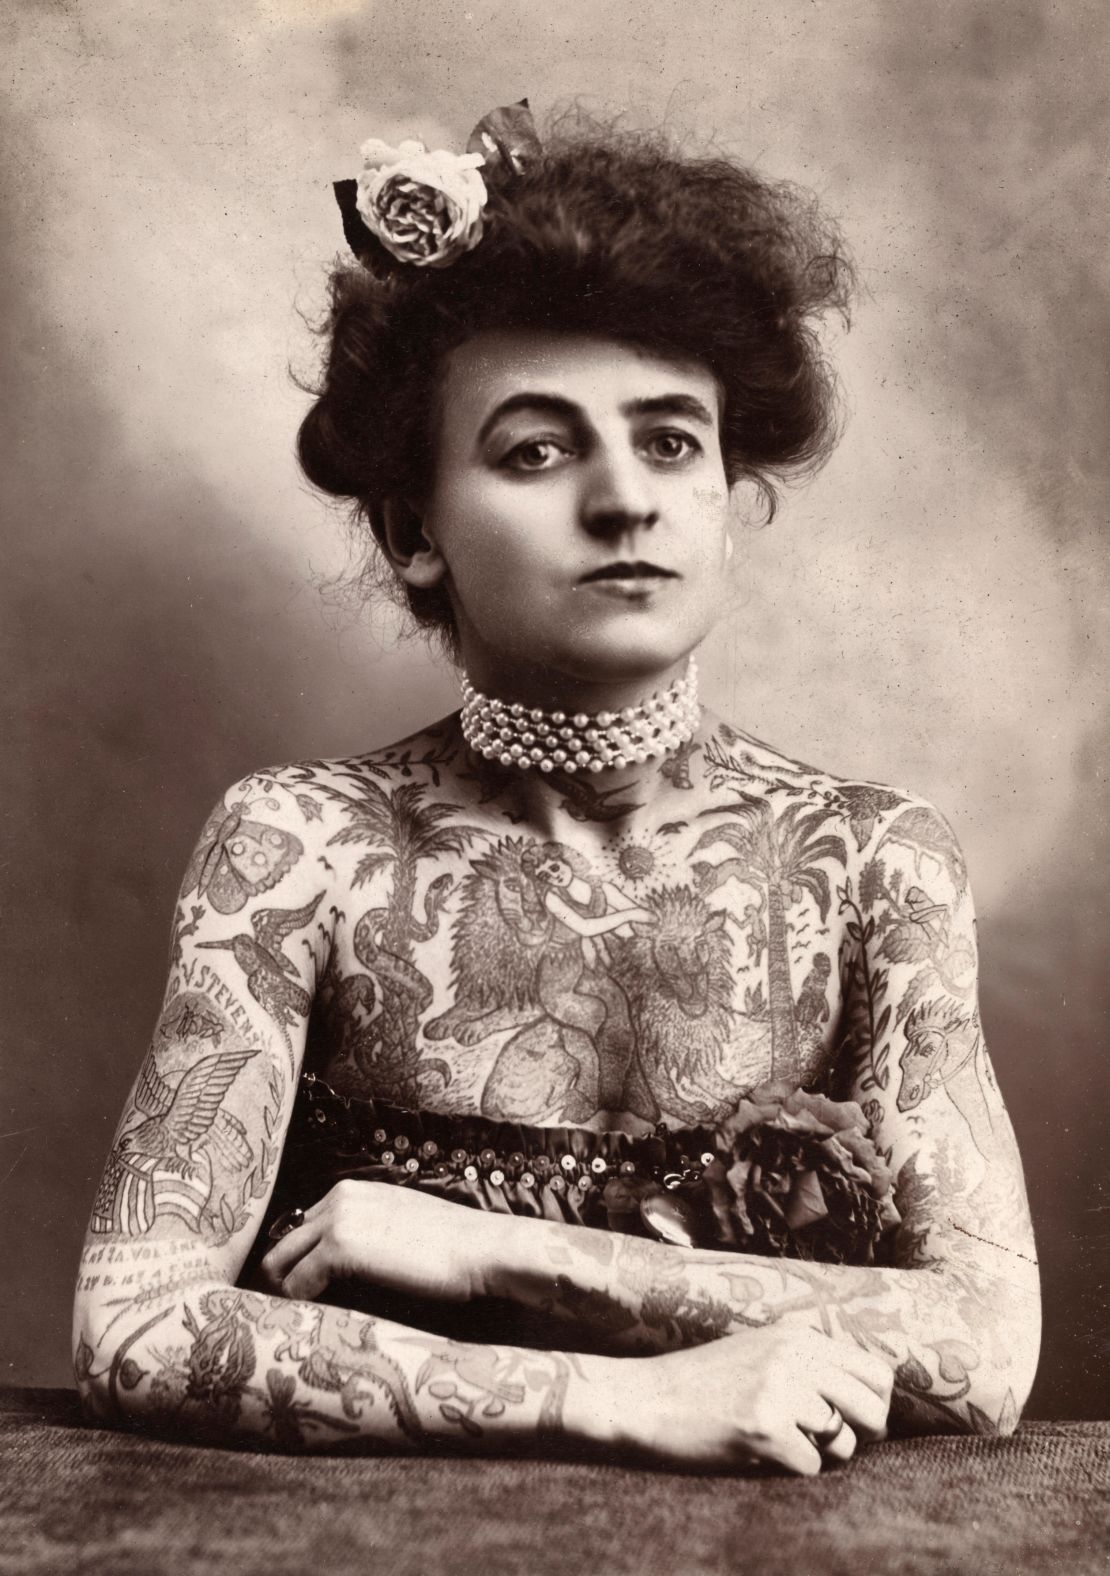 Portrait of a woman with tattooes or body paint covering her arms and chest.